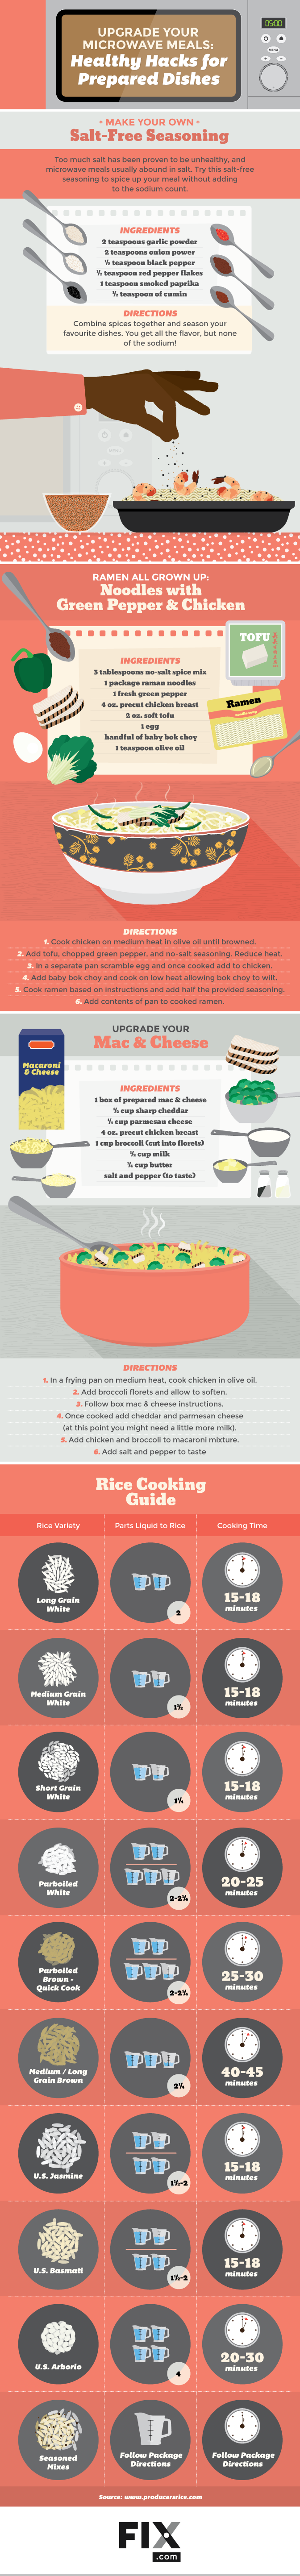 Upgrade Your Microwave Meals #infographic